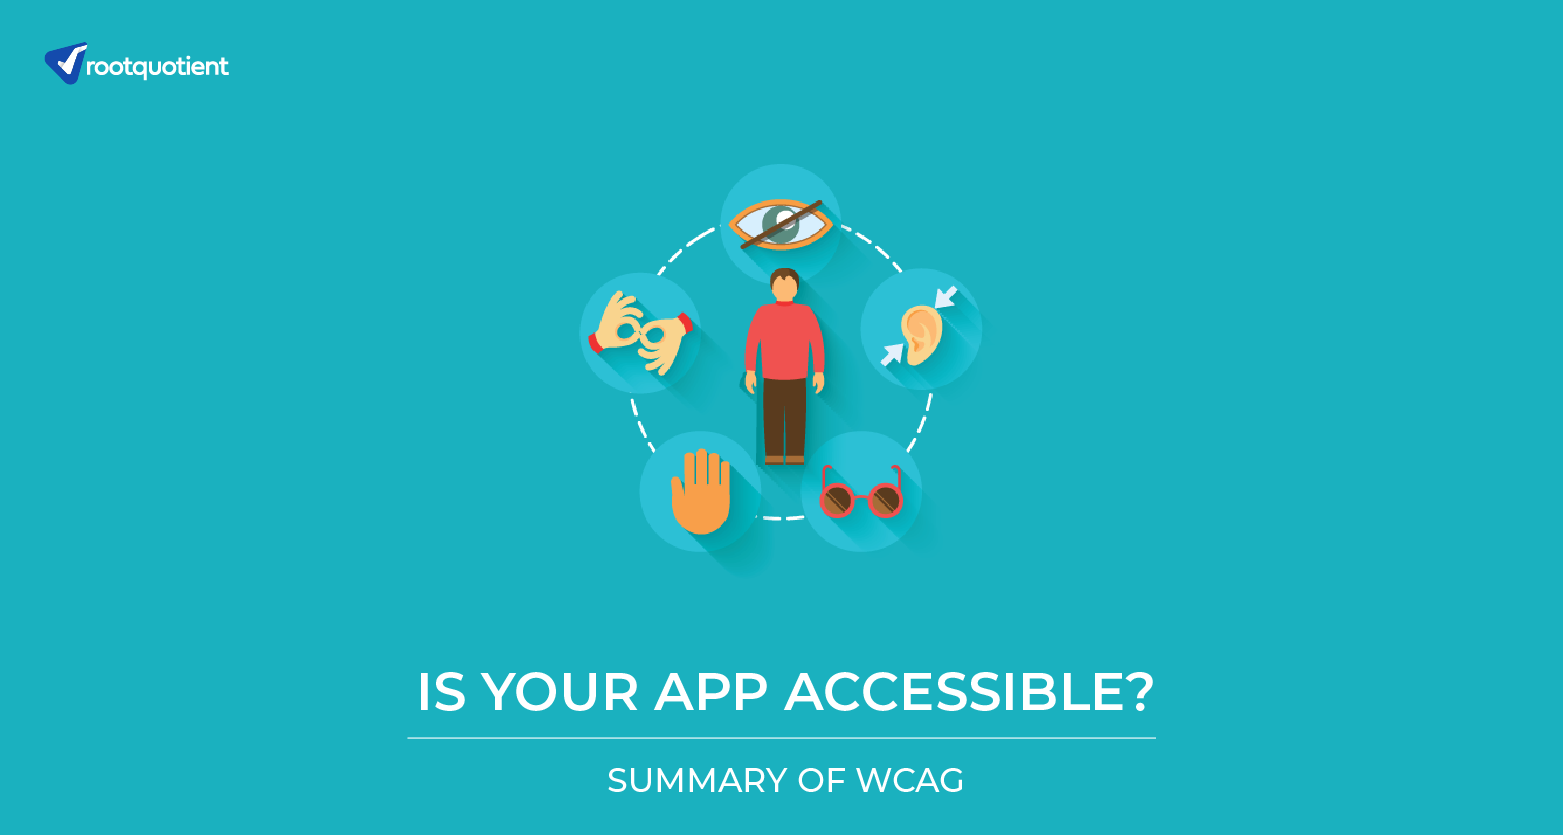 6 Points to Check Your App's Accessibility